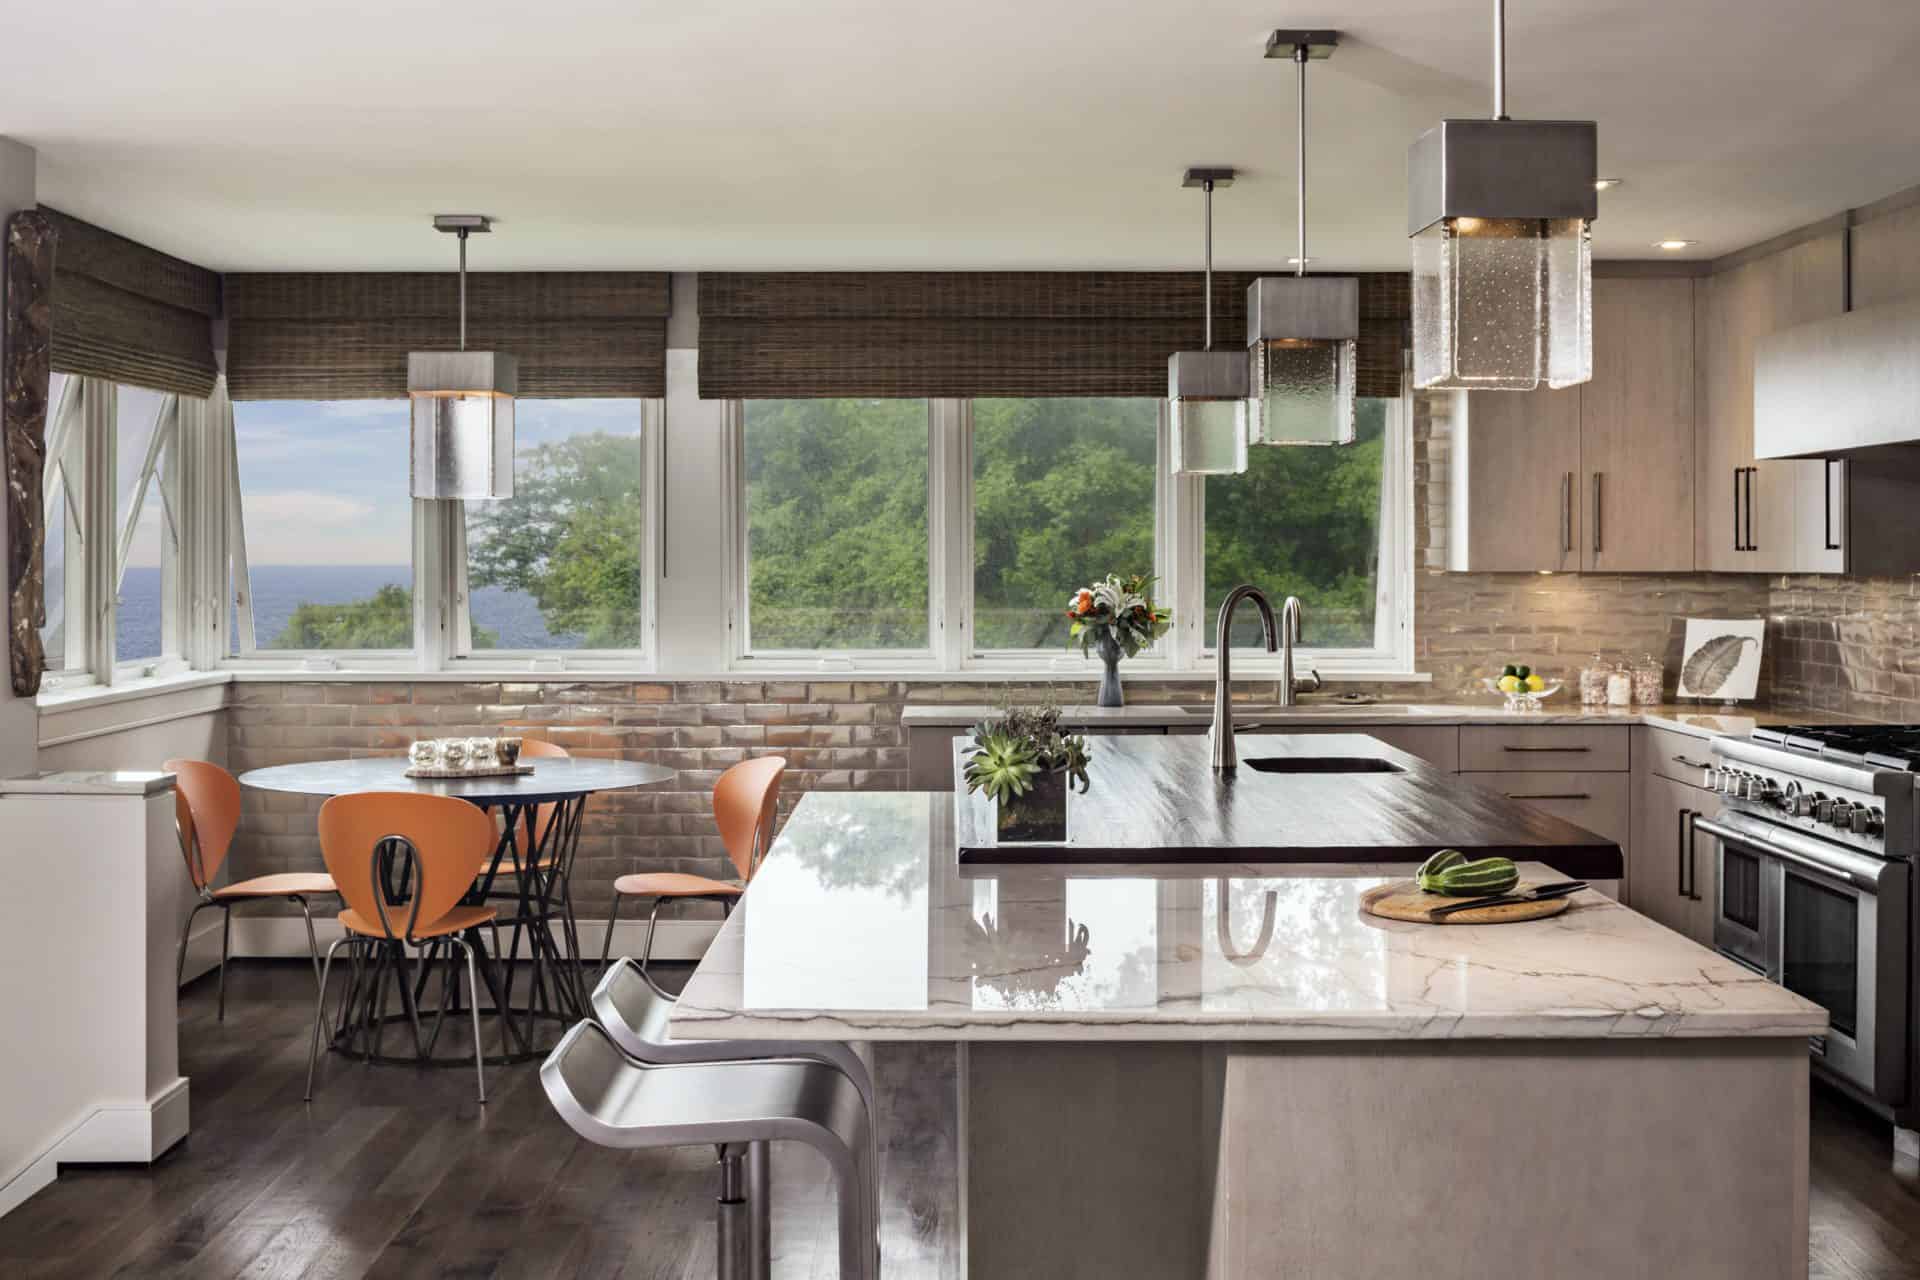 Stamford CT kitchen features  flat panel, frameless, fully custom mahogany cabinets by Bilotta, metallic, textured wallcovering and an island with seating.